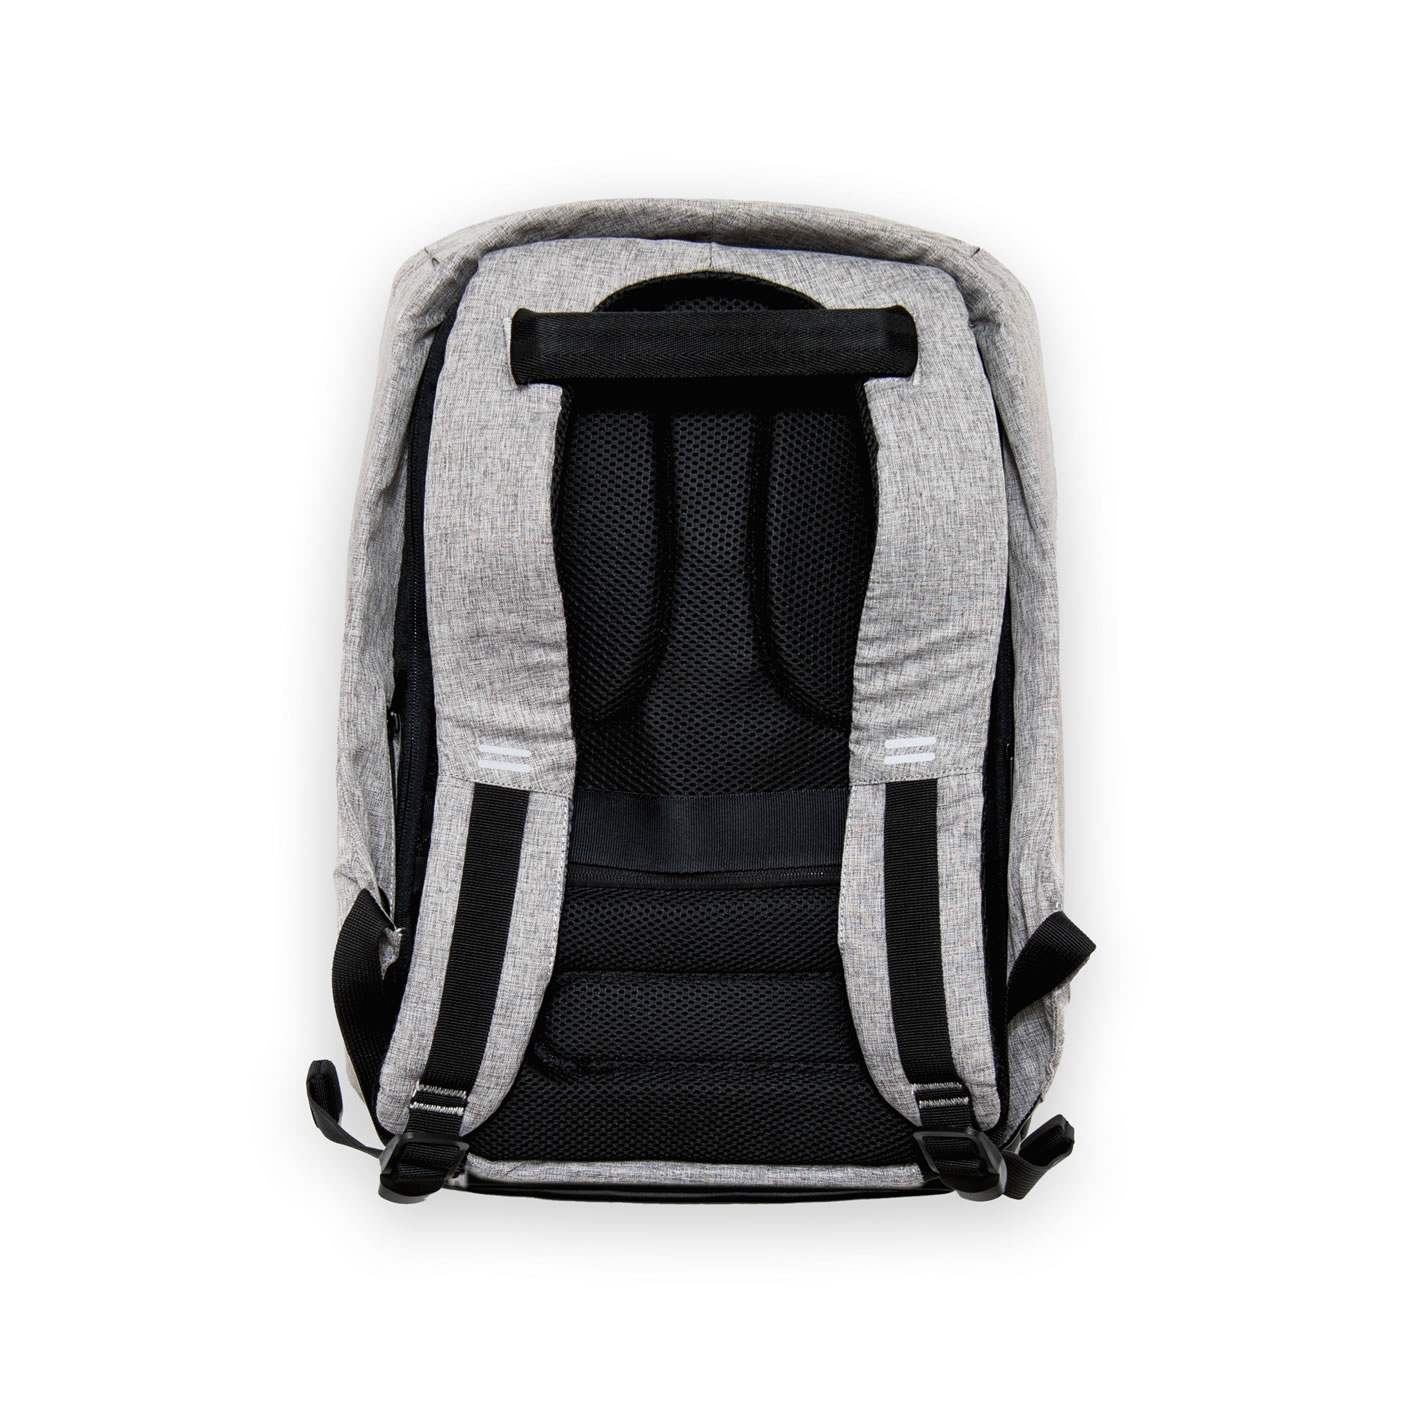 MX Aircraft and Merchandise » Bobby Anti Theft Bag